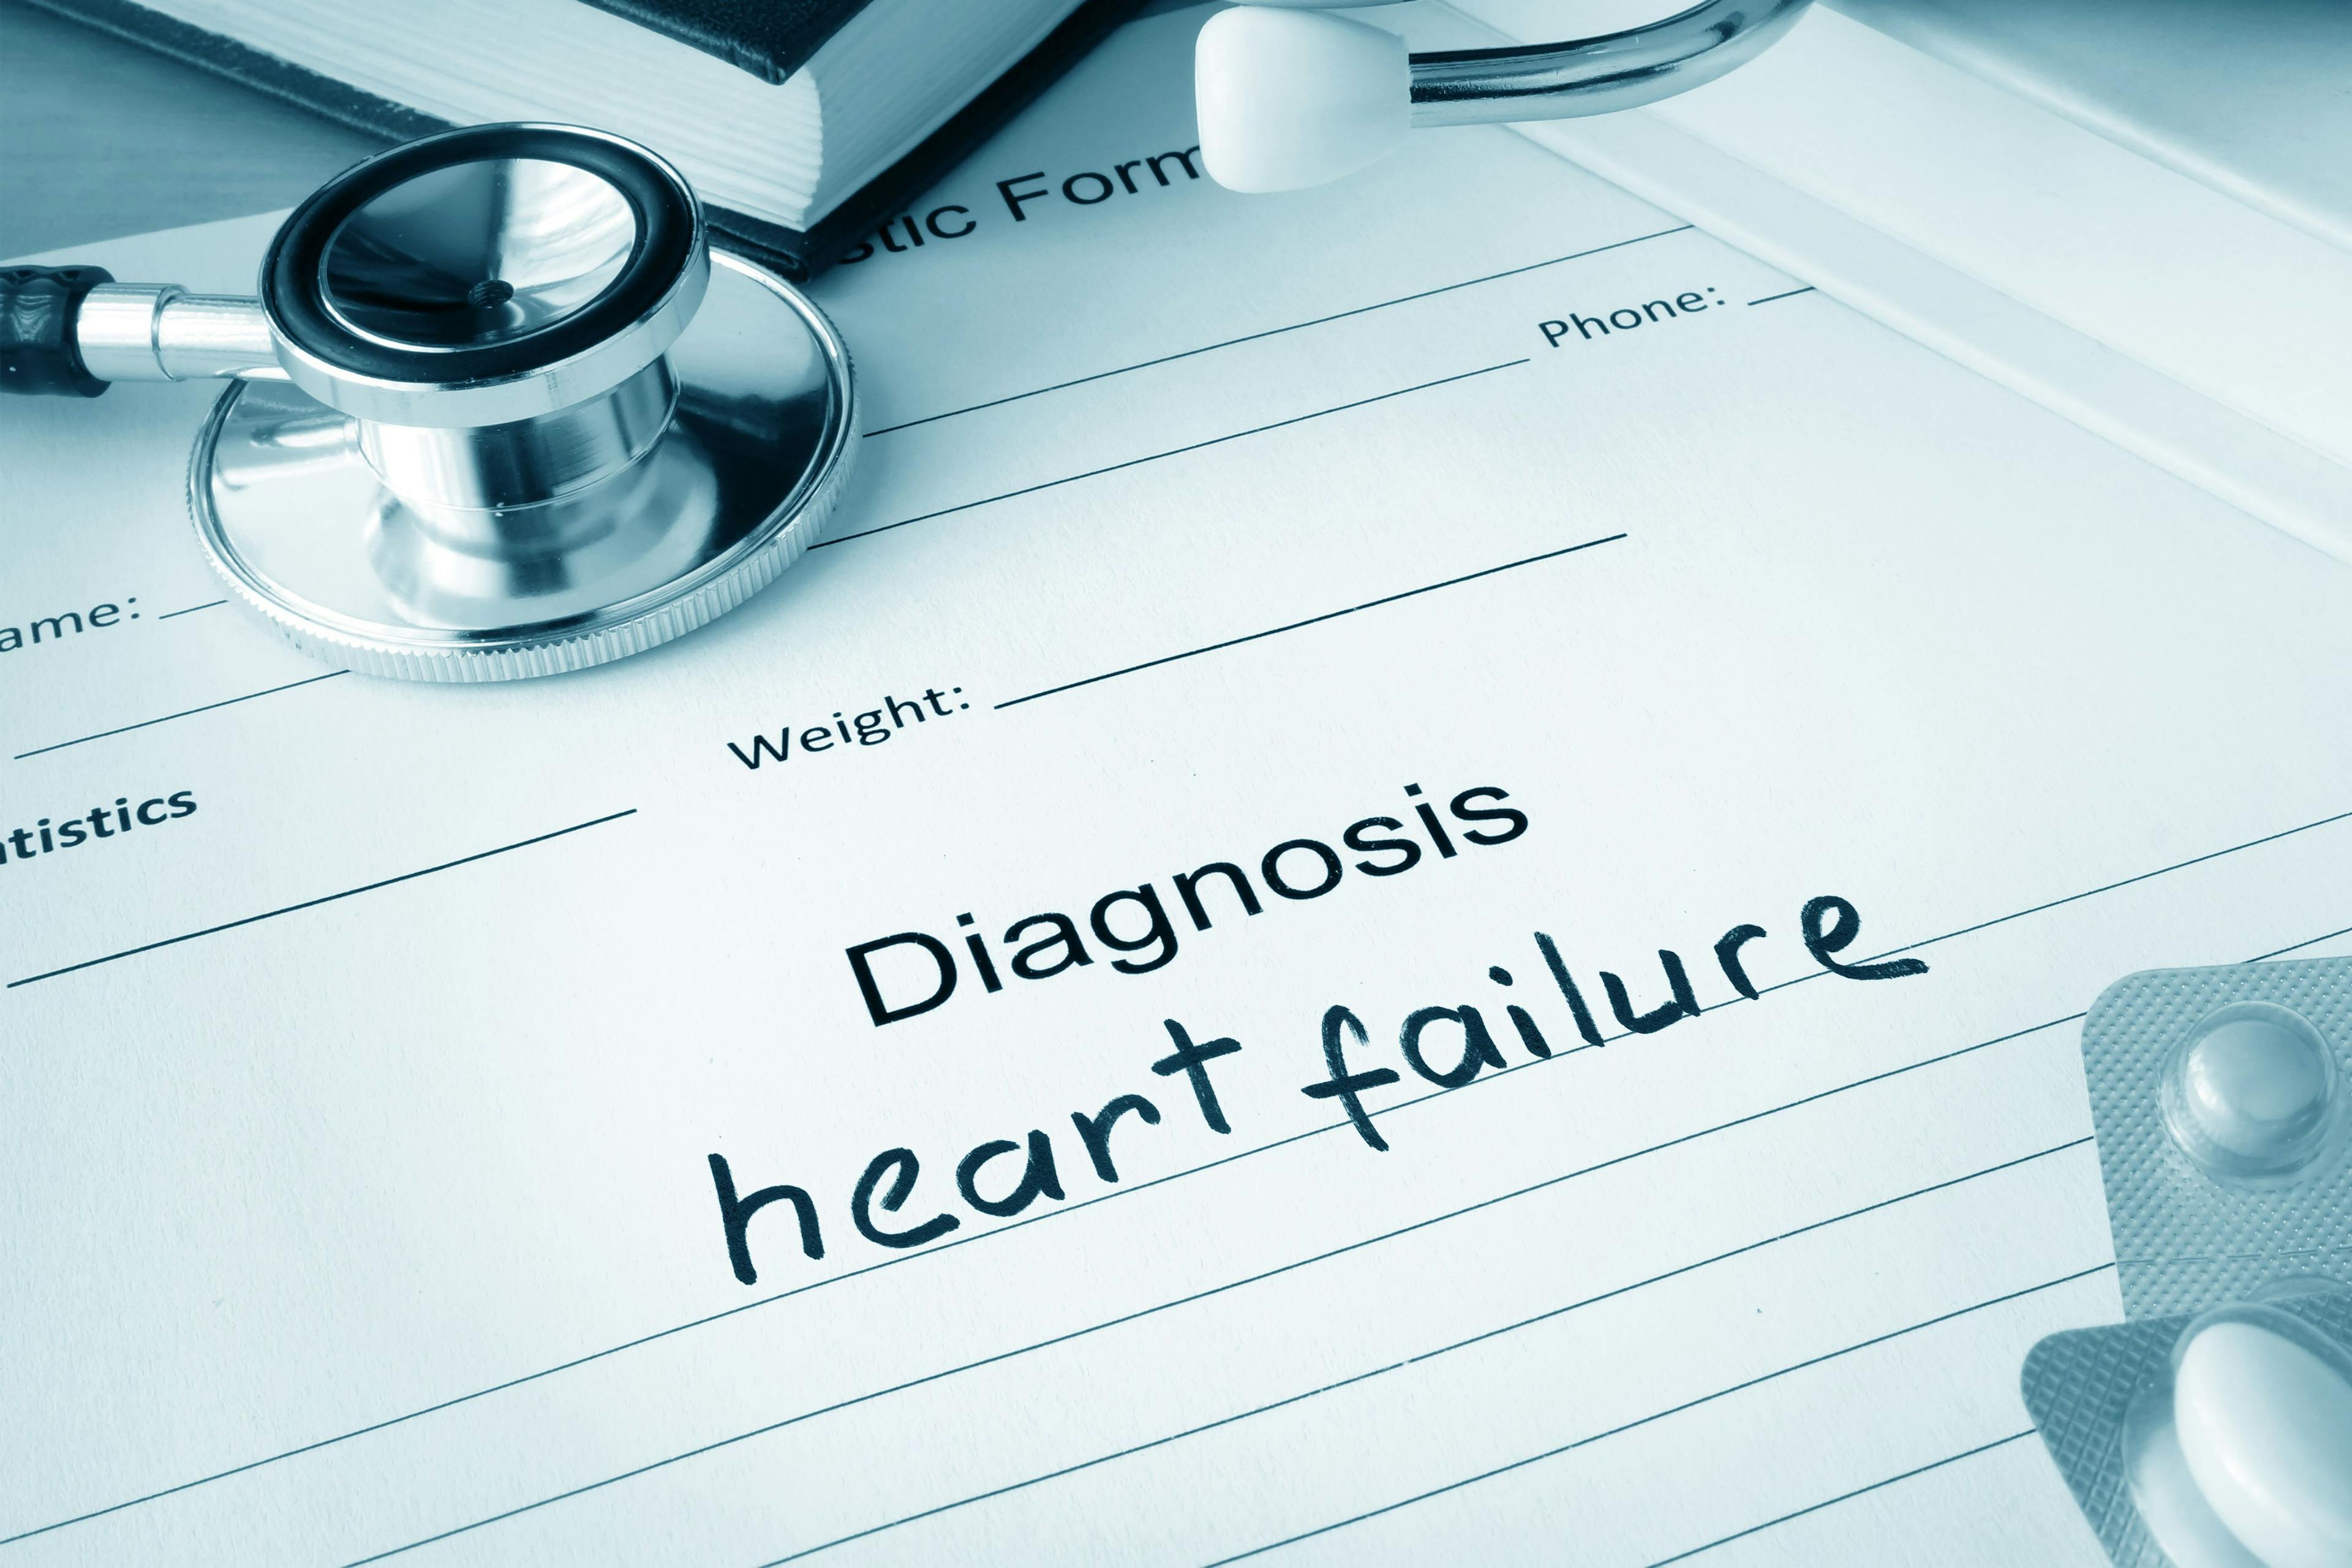 Heart failure stock image featuring doctor's note pad, medications, and medical equipment. | Credit: Fotolia